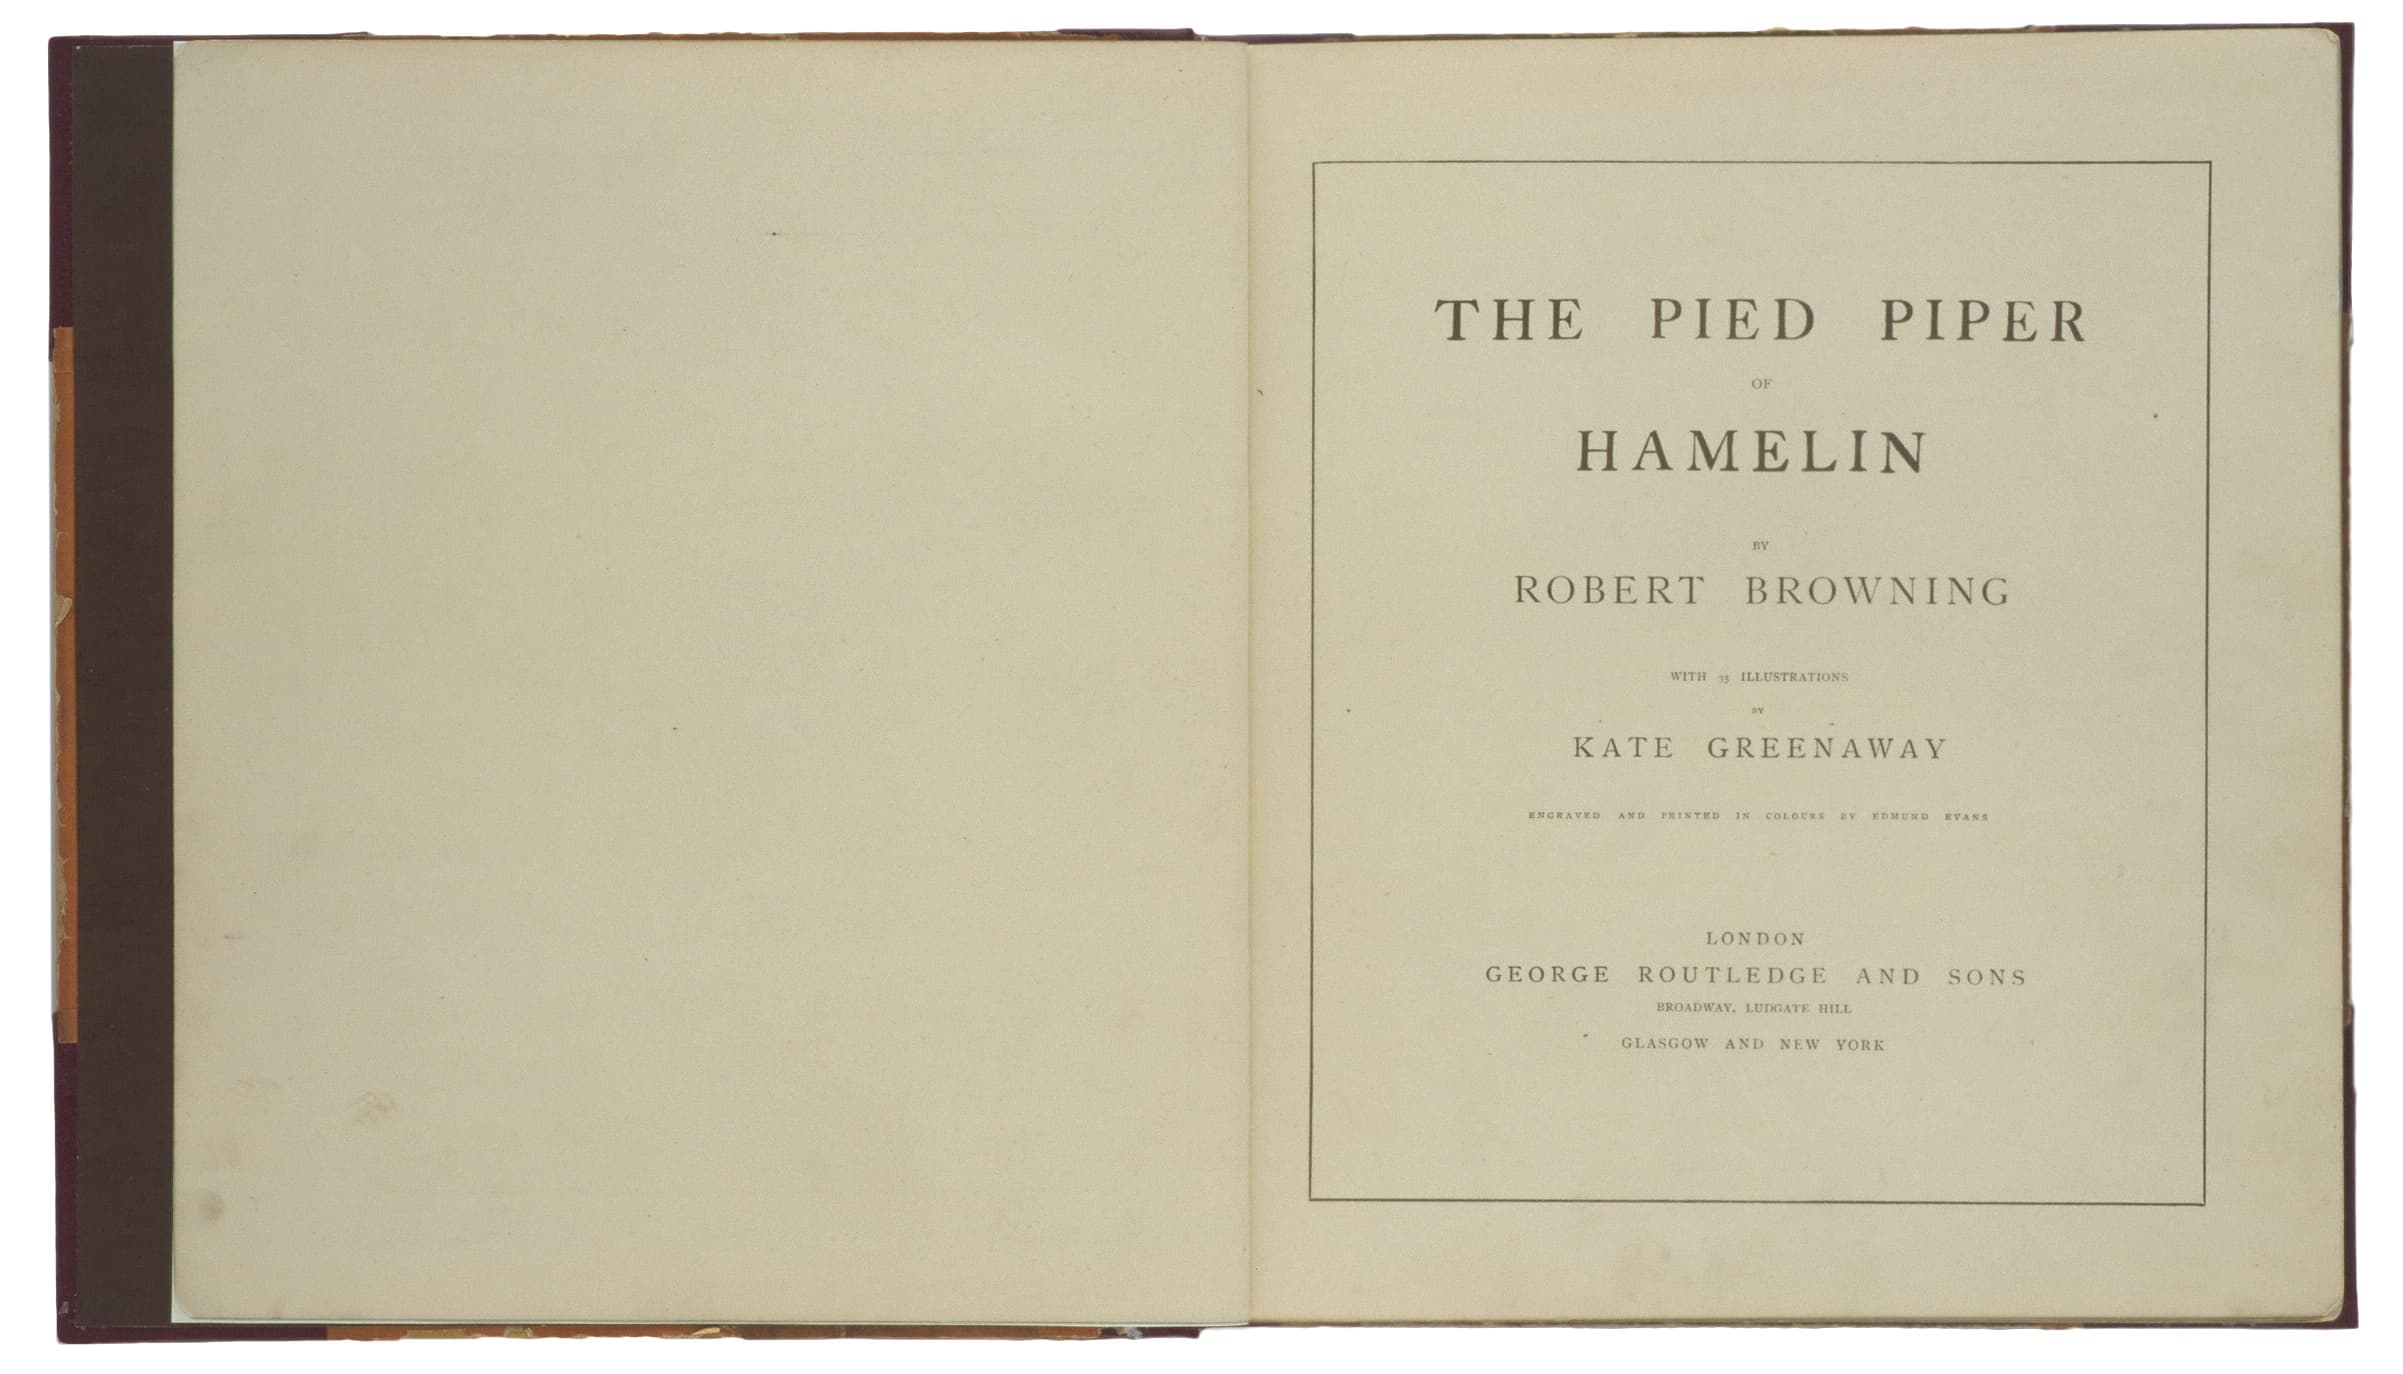 Title page of The Pied Piper of Hamelin